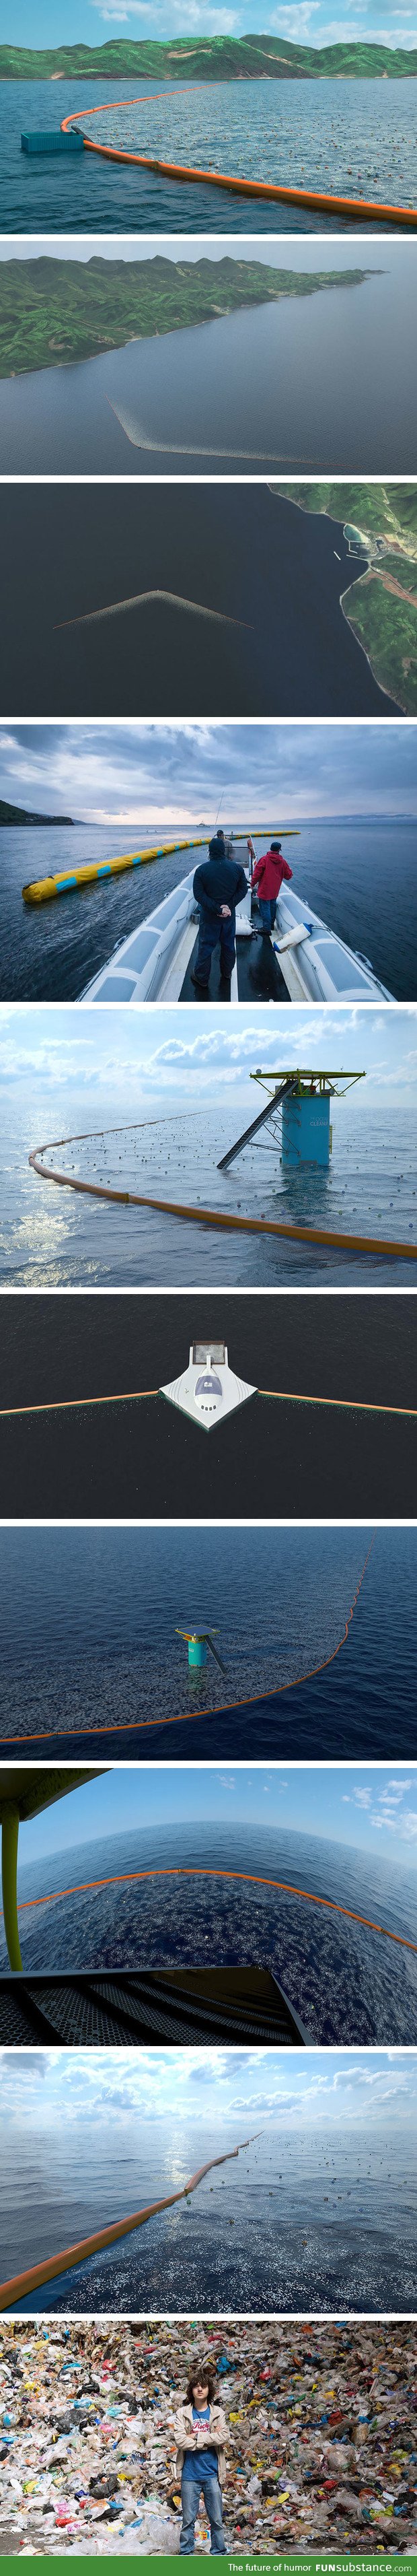 An inventor's idea for cleaner oceans